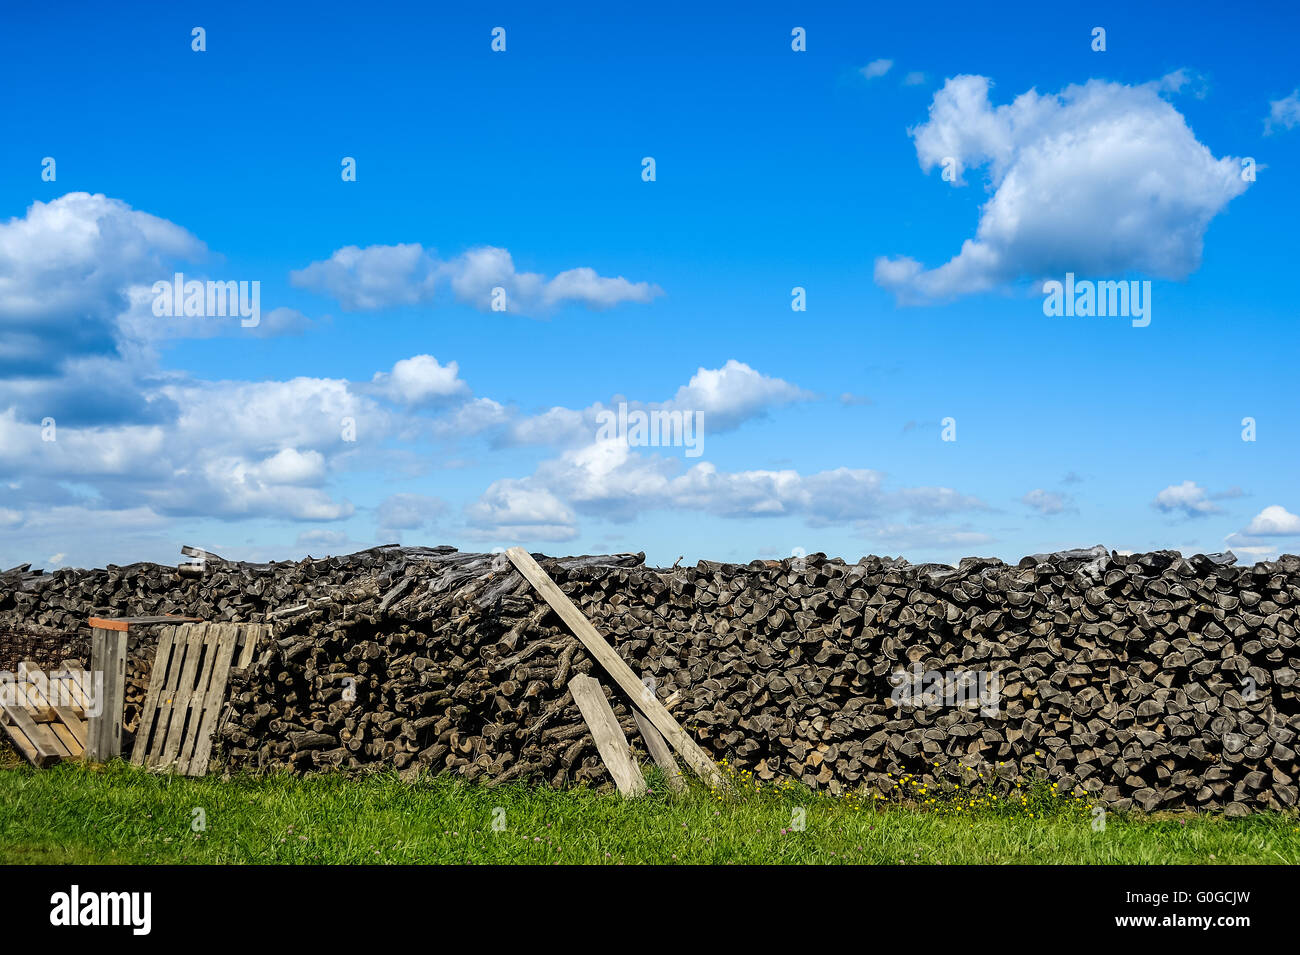 Lumberyard outdoors with clouds and blue sky Stock Photo